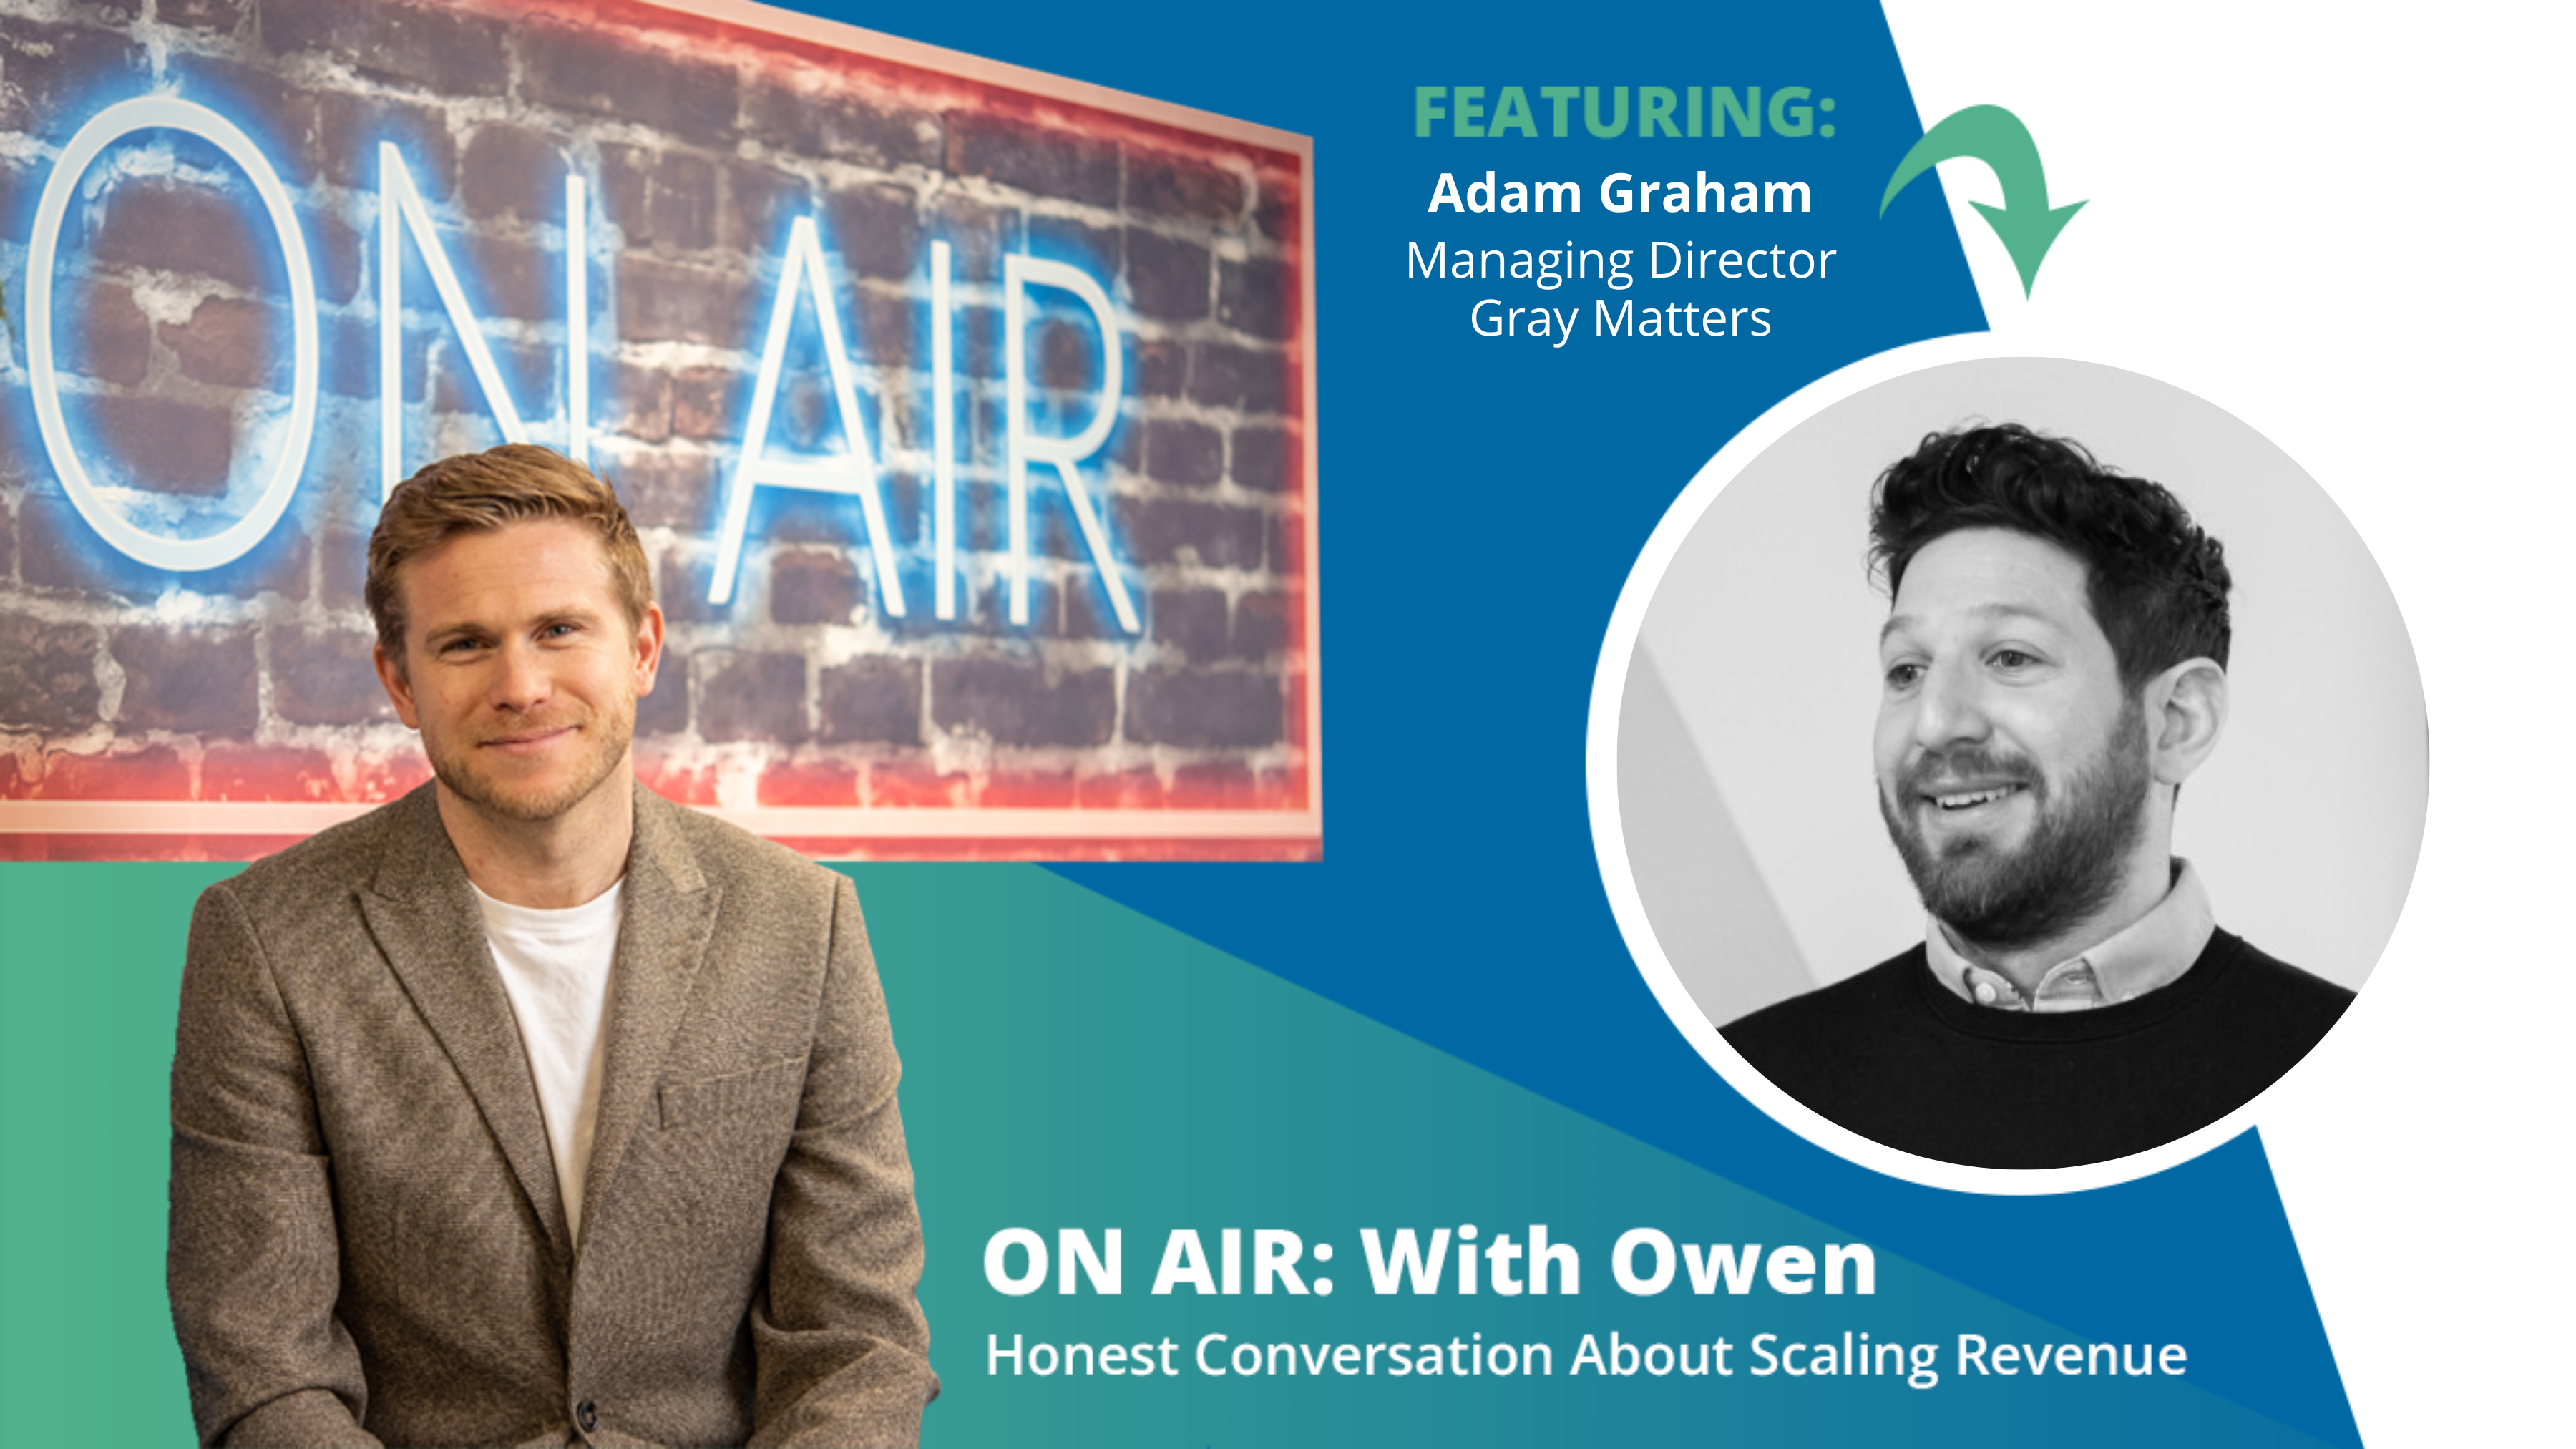 ON AIR: With Owen Episode 79 Featuring Adam Graham – Managing Director, Gray Matters